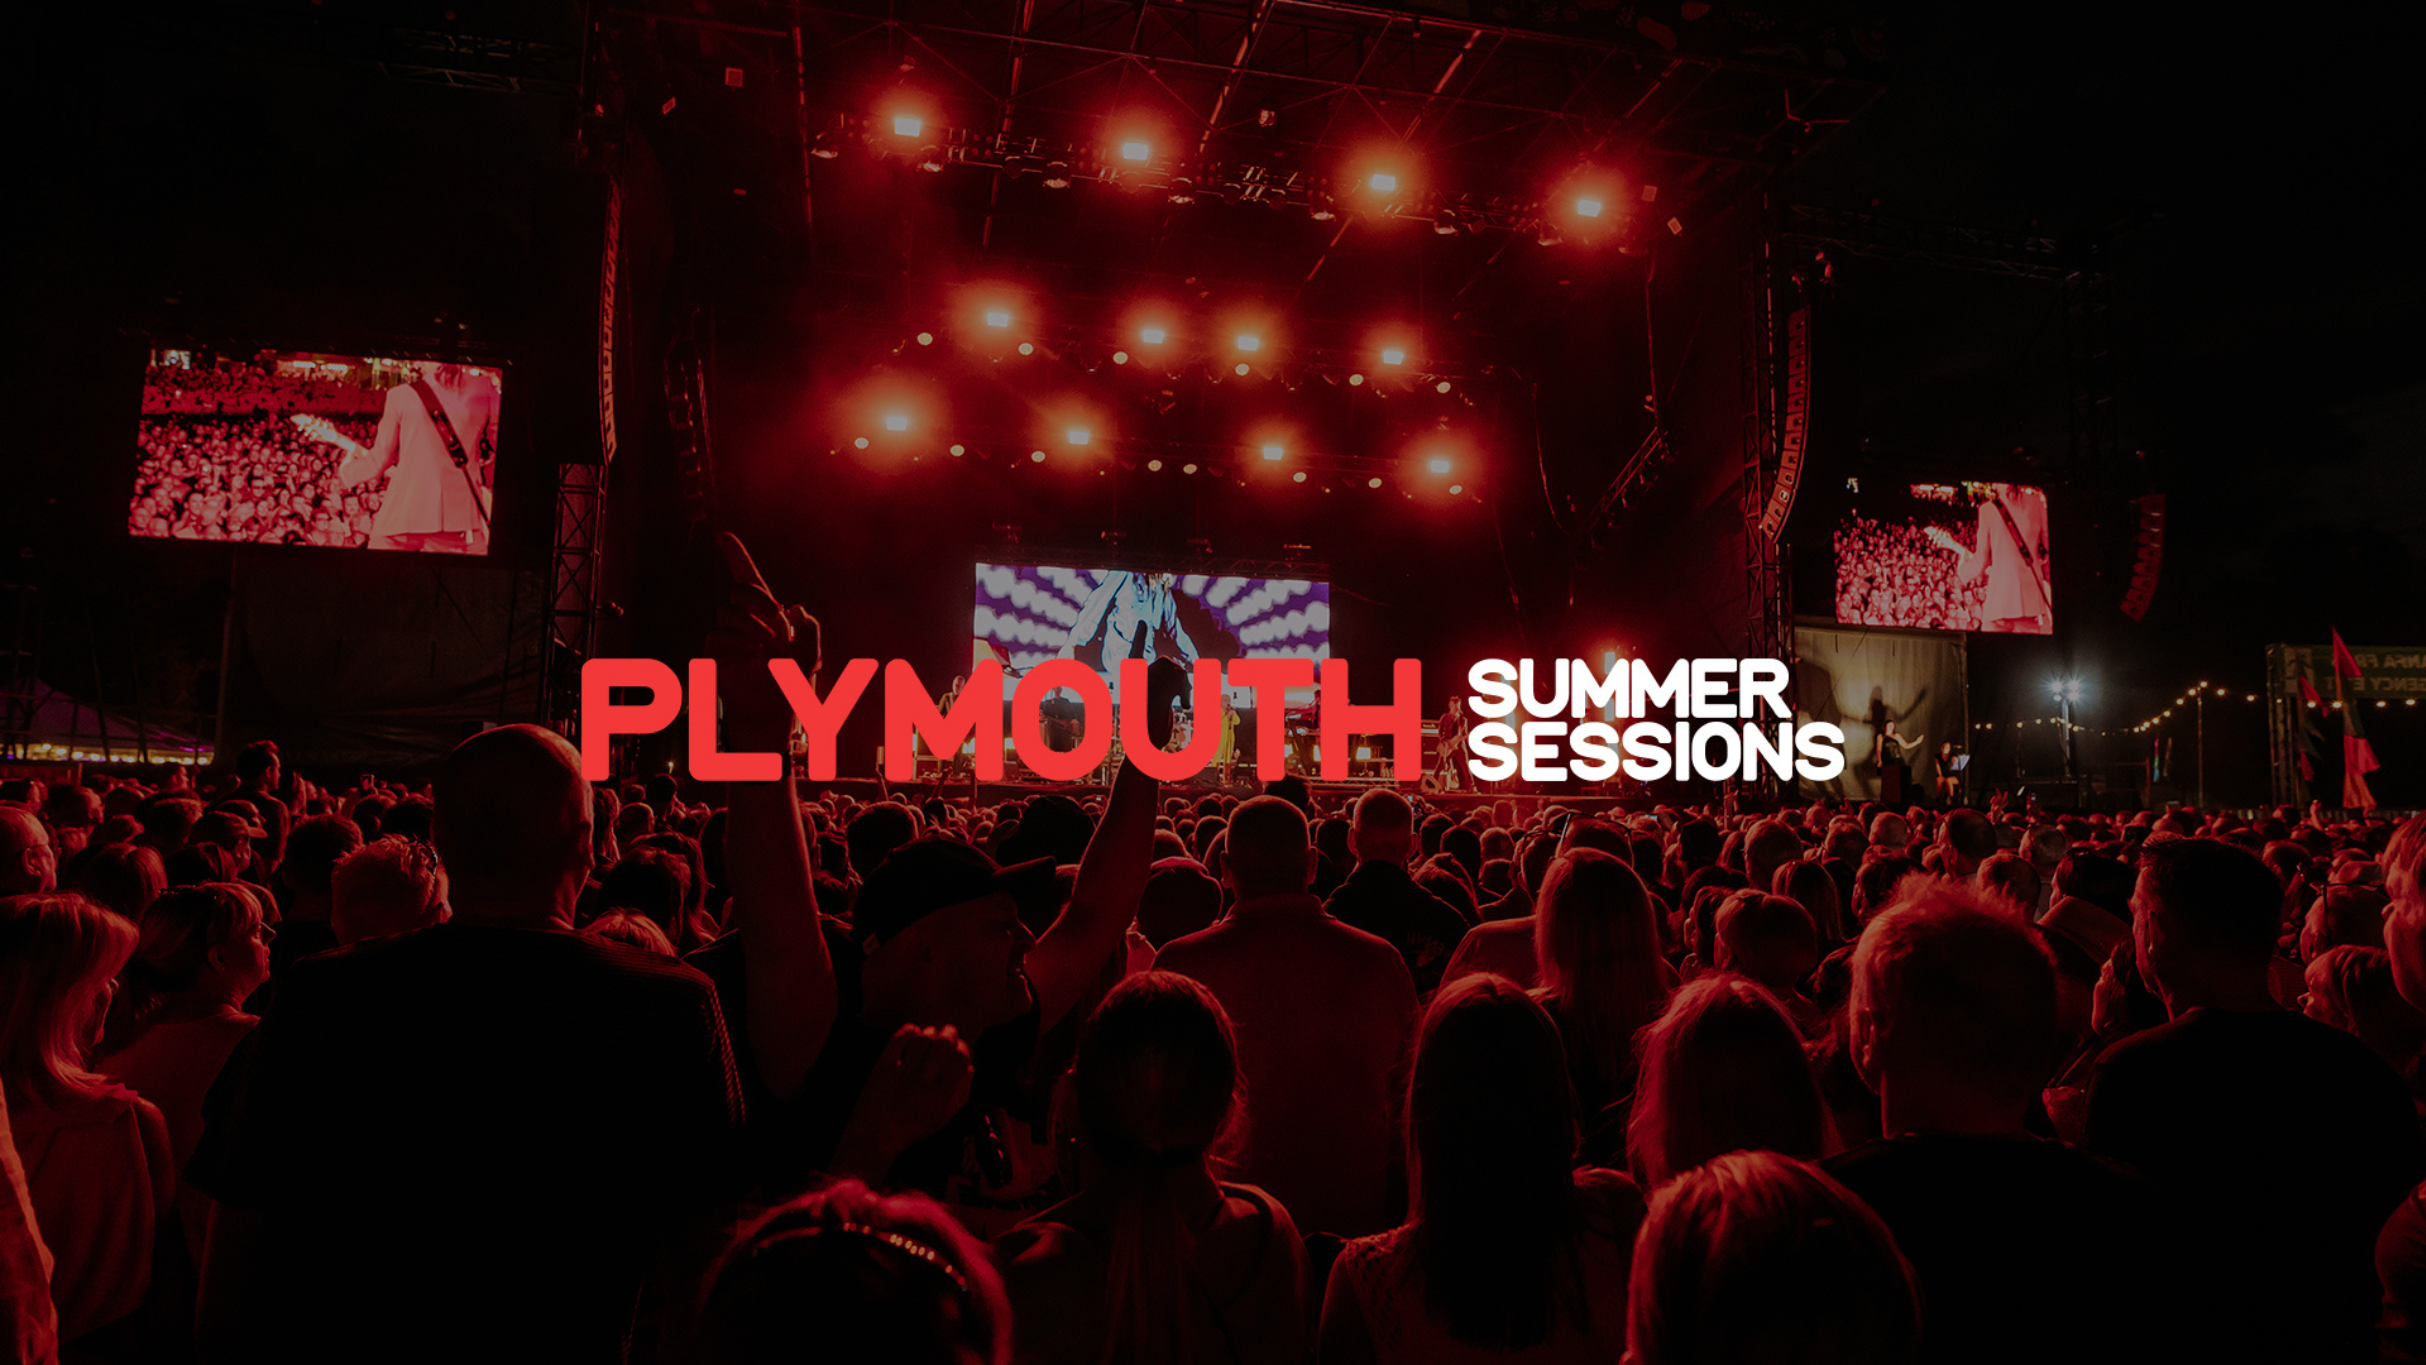 Plymouth Summer Sessions - Bryan Adams in Plymouth promo photo for Ticketmaster presale offer code